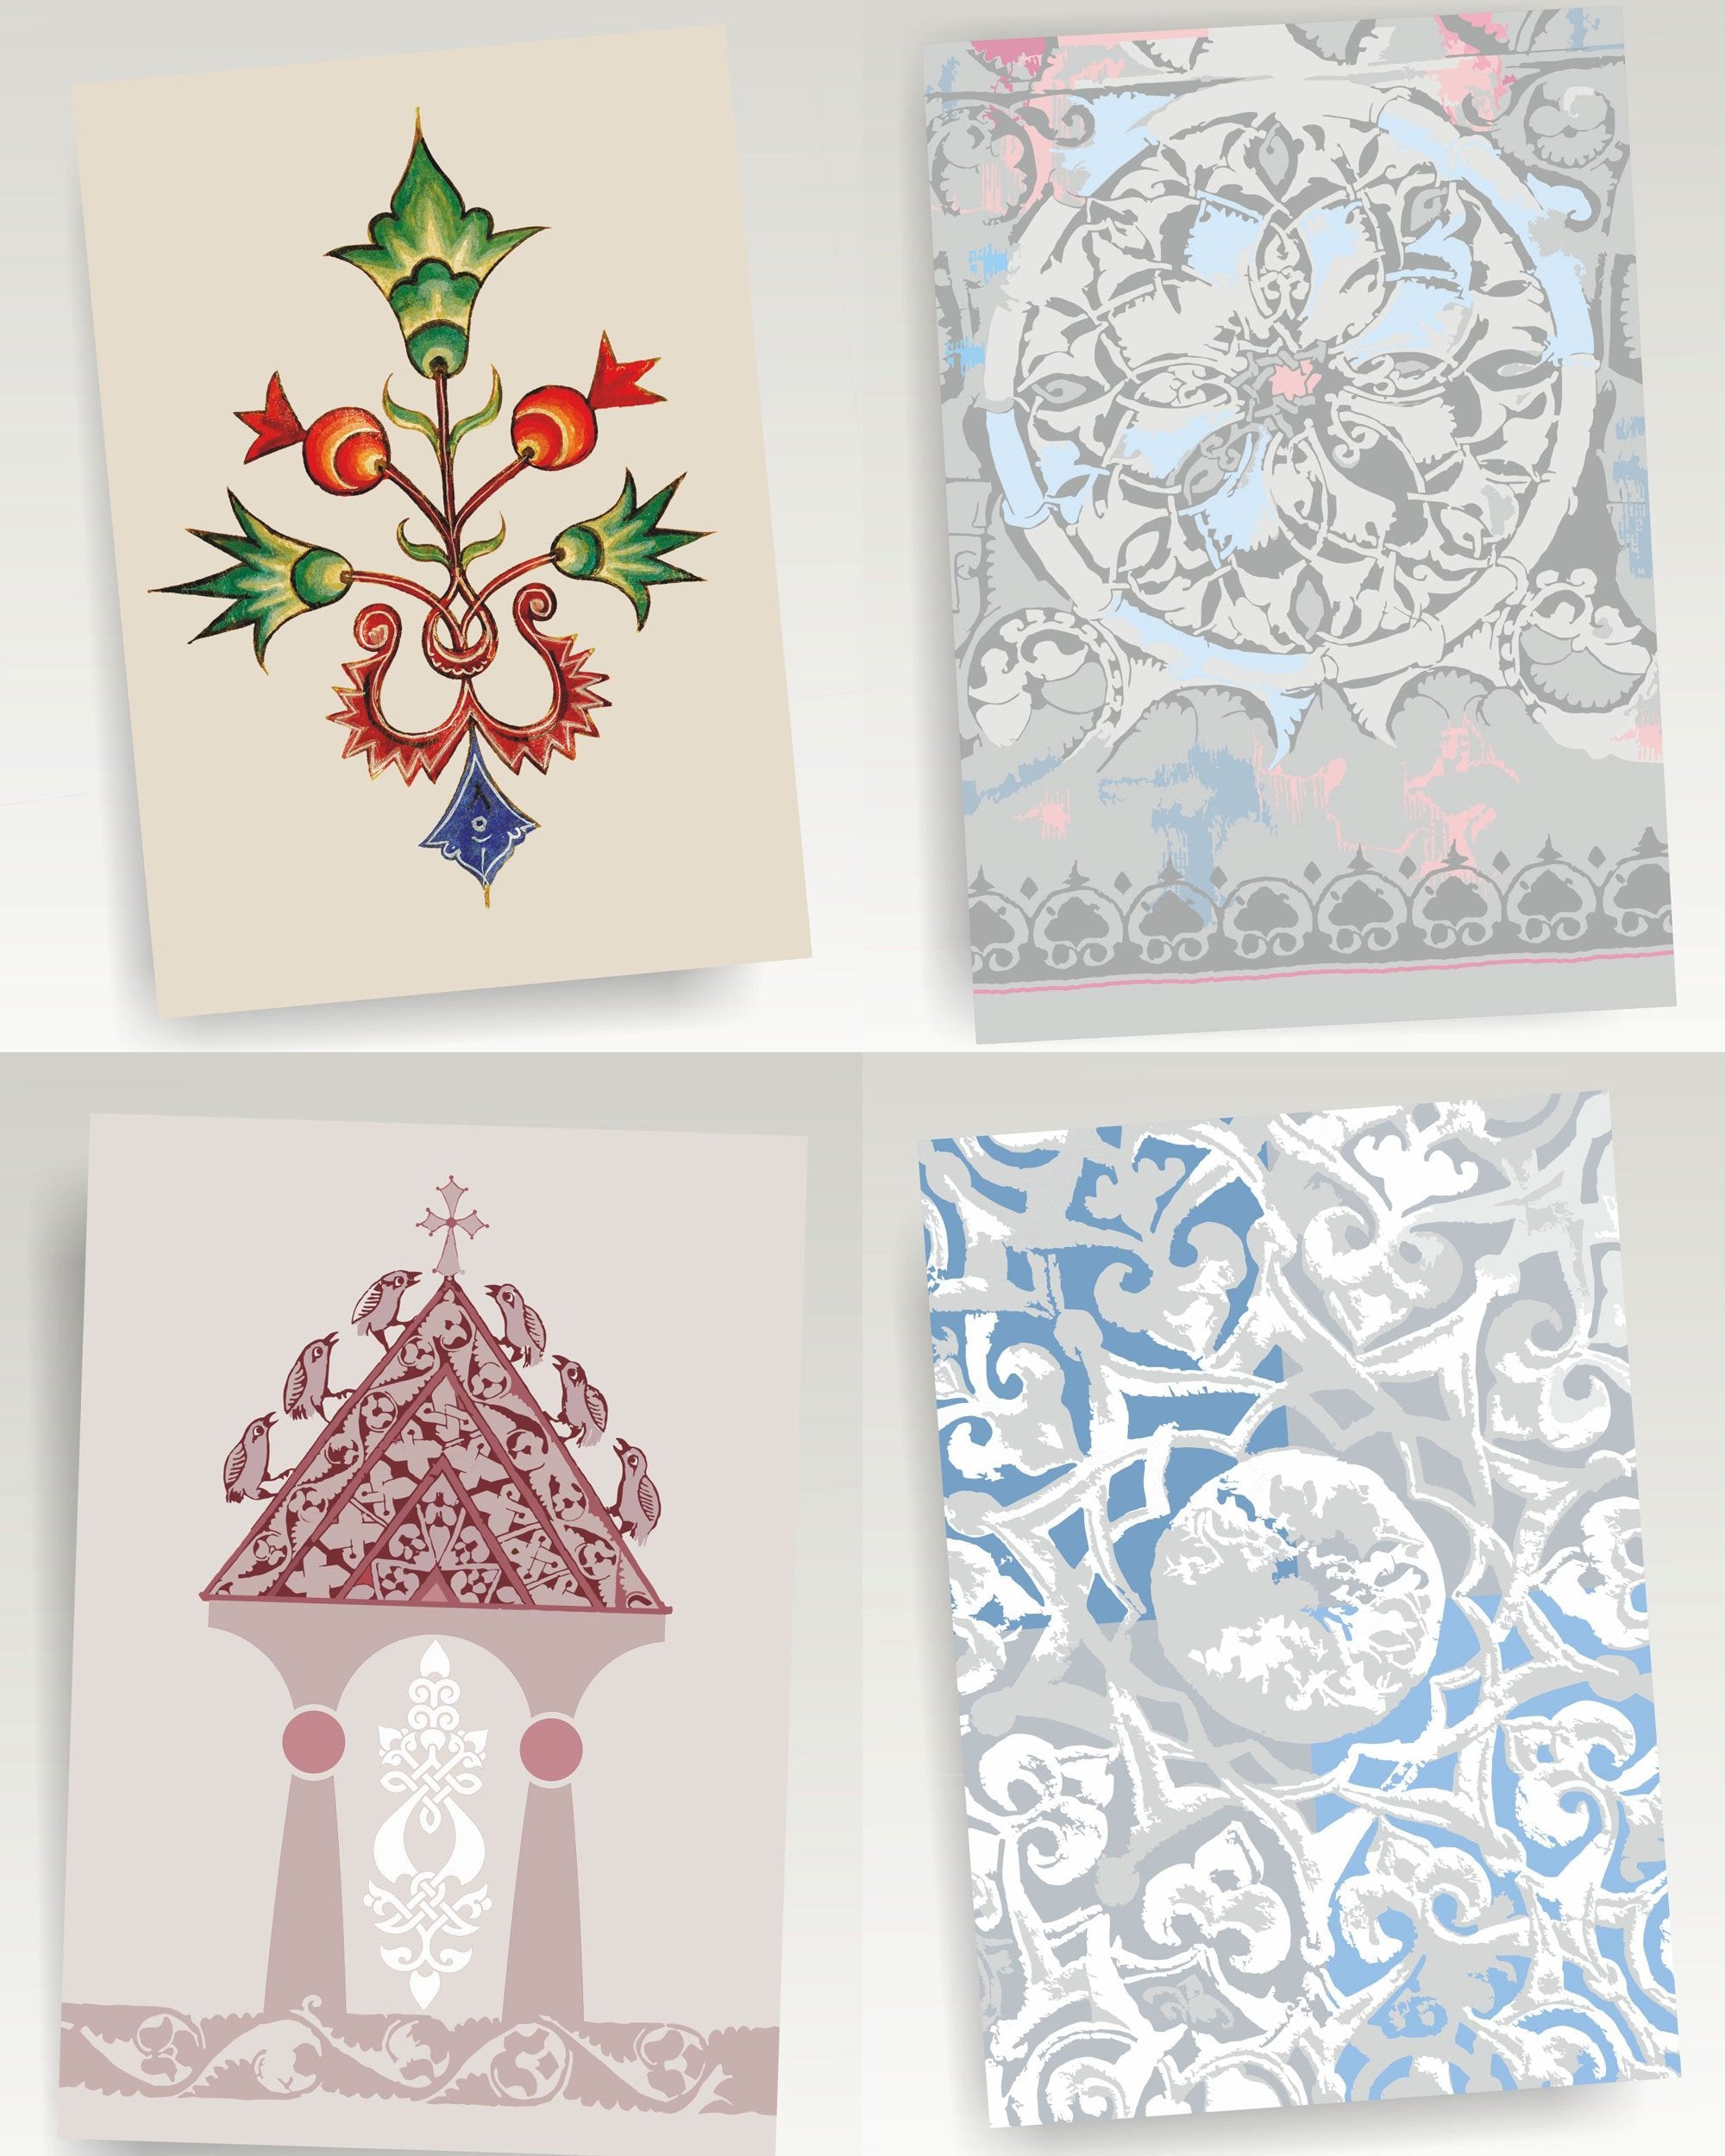 Armenian Postcards Collection by Kyurkchyan - 14 pack